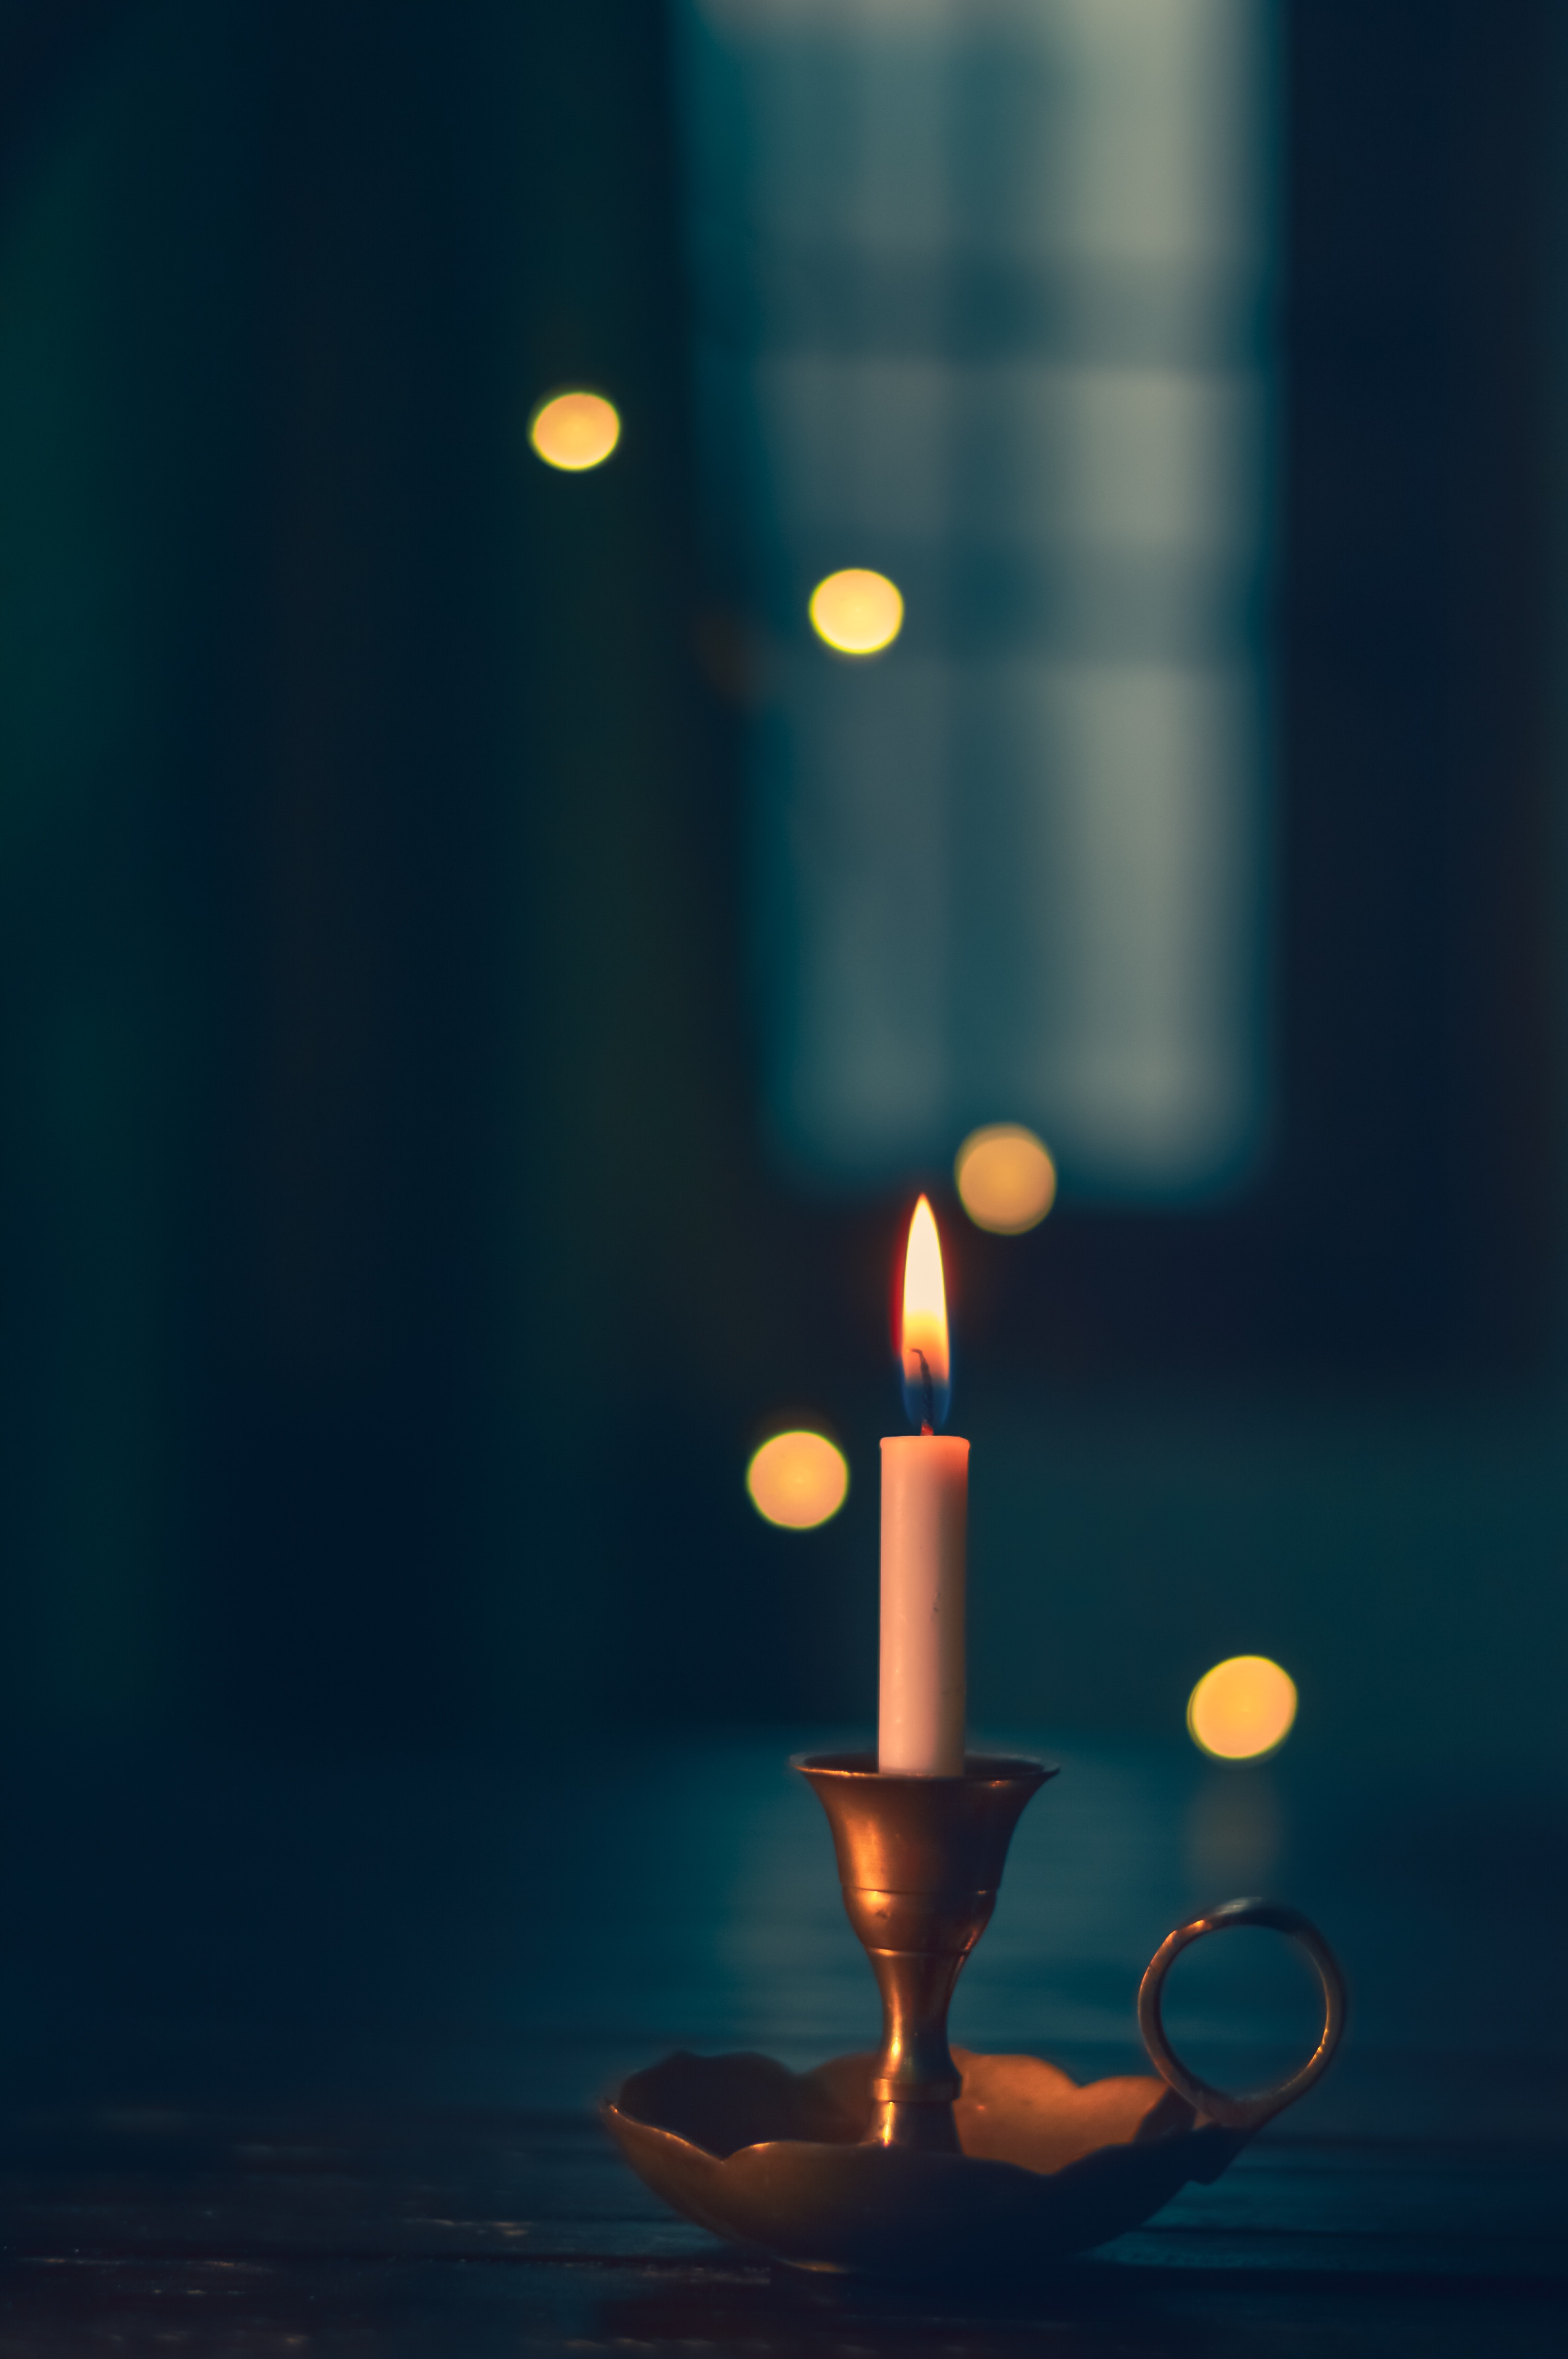 blur, miscellanea, candle, fire, wax, miscellaneous, smooth, wick, candlestick 5K